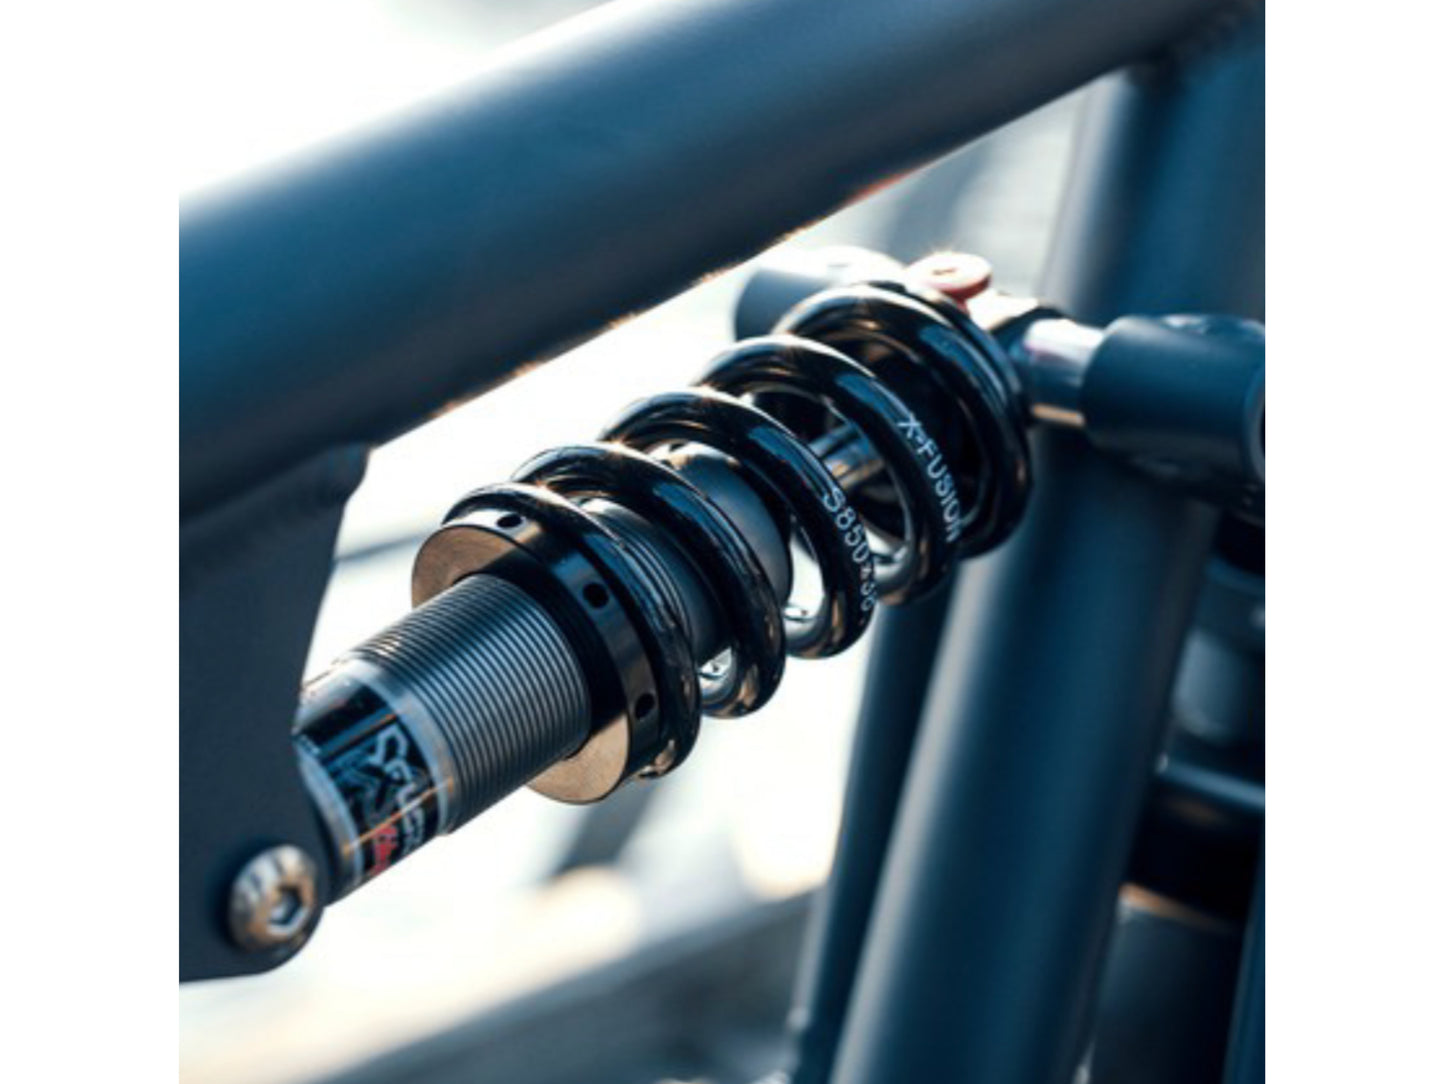 Riese and Muller Load 75 Vario HS eMTB full suspension close up X Fusion Glyde rear shock